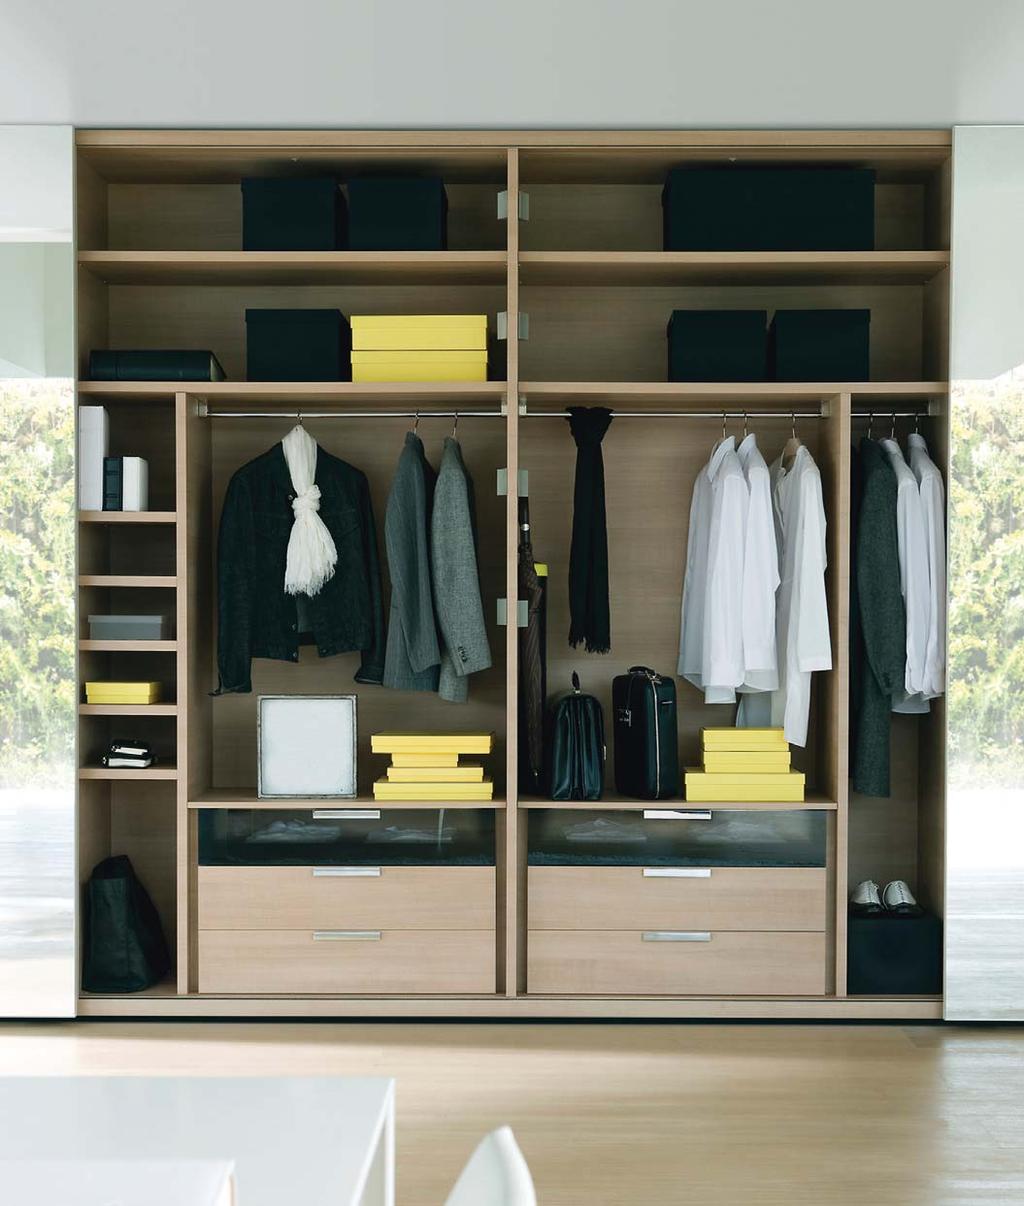 Sliding Door Wardrobes Custom wardrobes can turn a simple closet into a beautiful and elegant space, while the right sliding door can add light and the illusion of more space to a room.